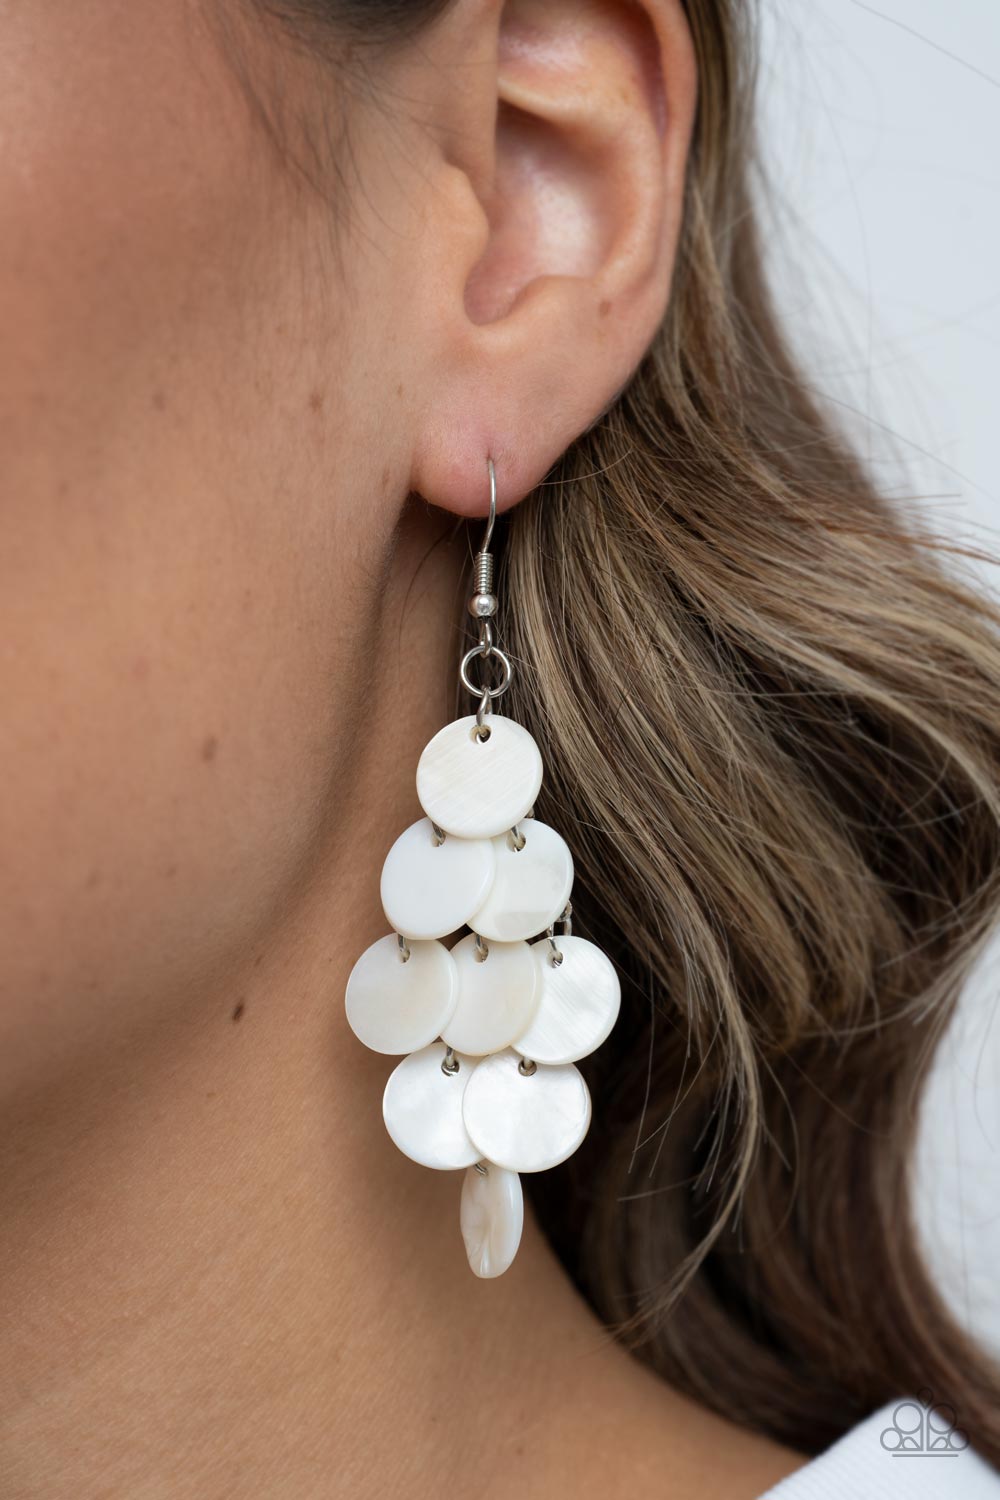 Tropical Tryst - white - Paparazzi earrings